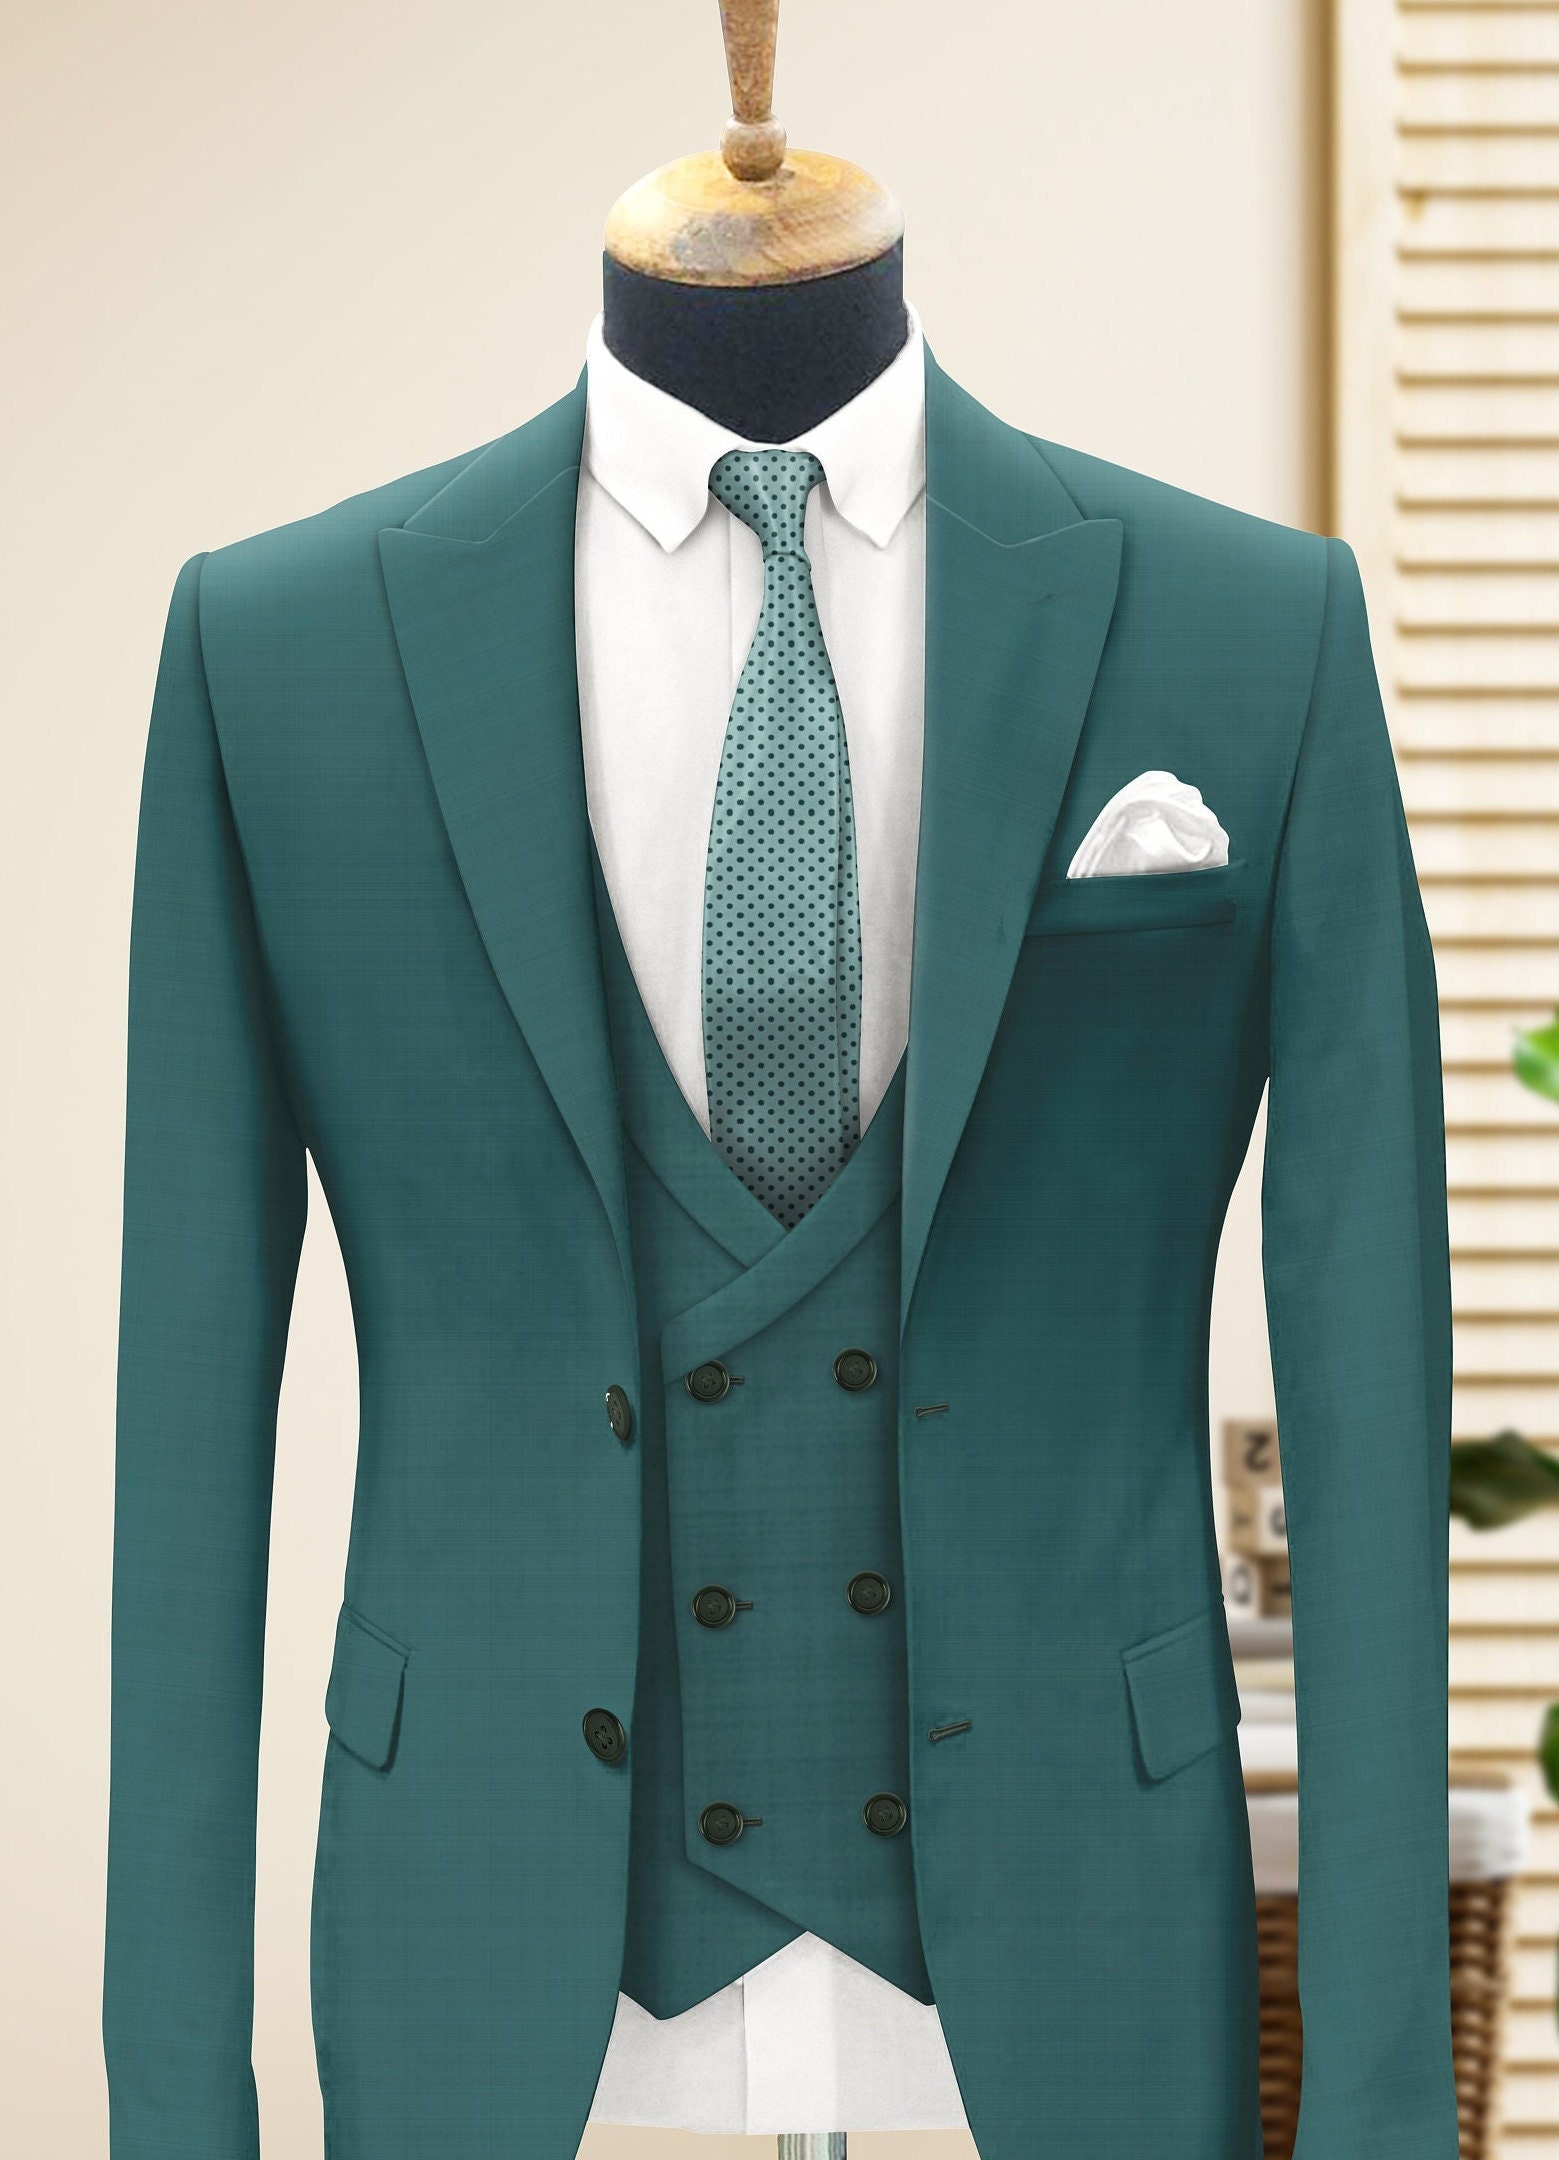 Me My Suit and Tie | Mode homme, Costume homme vert, Costume homme